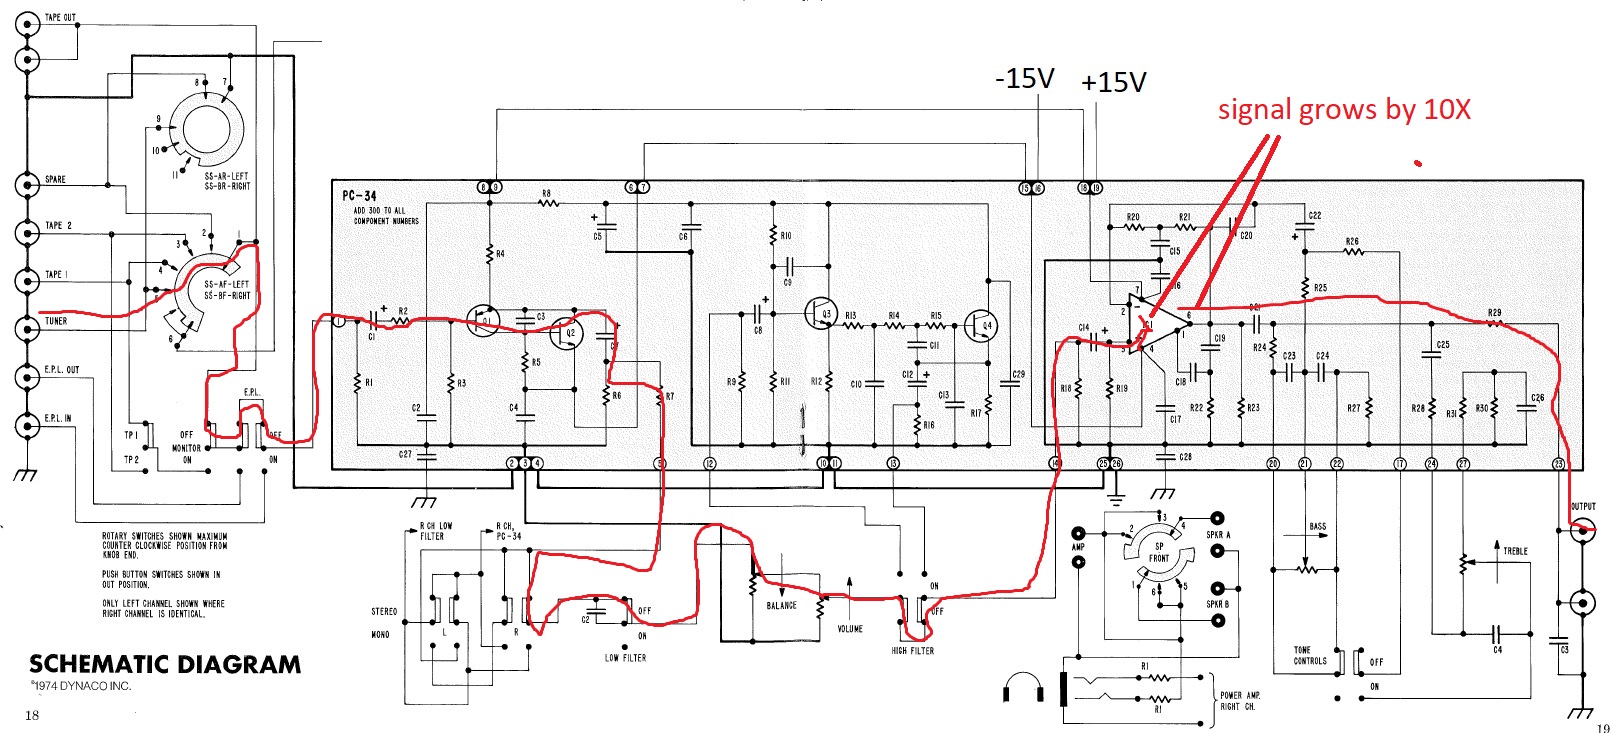 high level schematic of the PAT-5 with red line tracing signal path from input to output